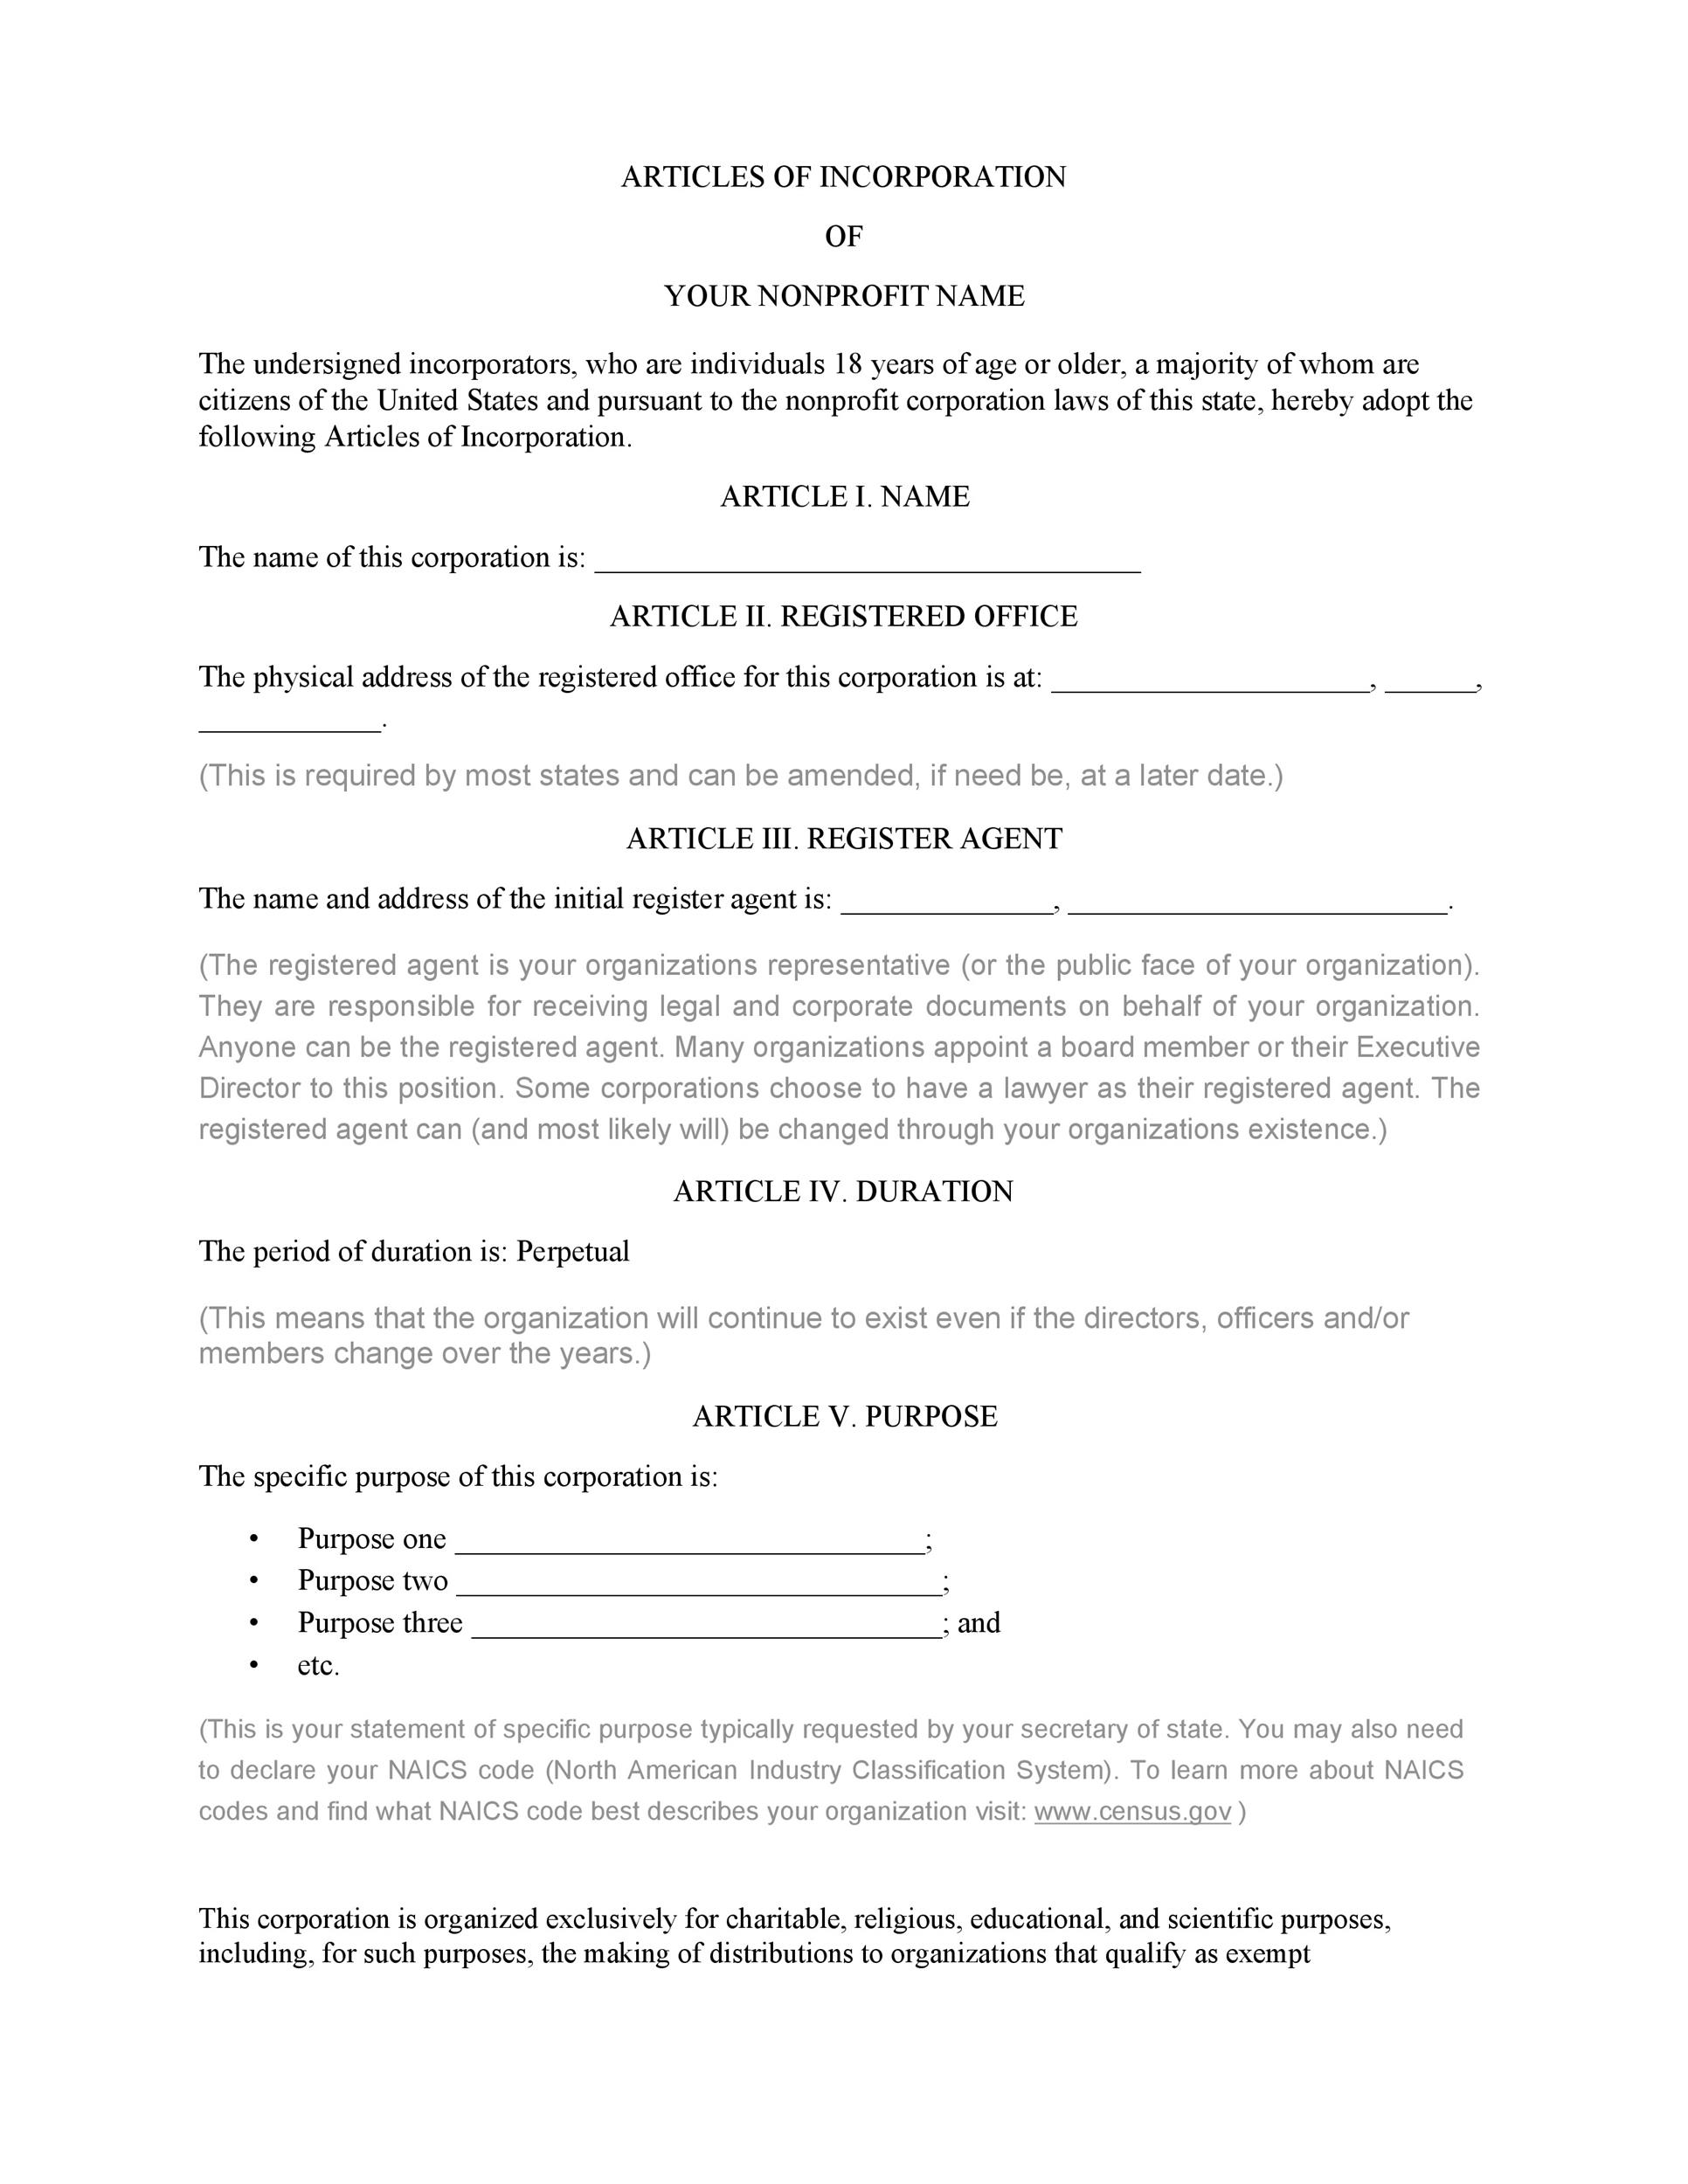 Free articles of incorporation template 20